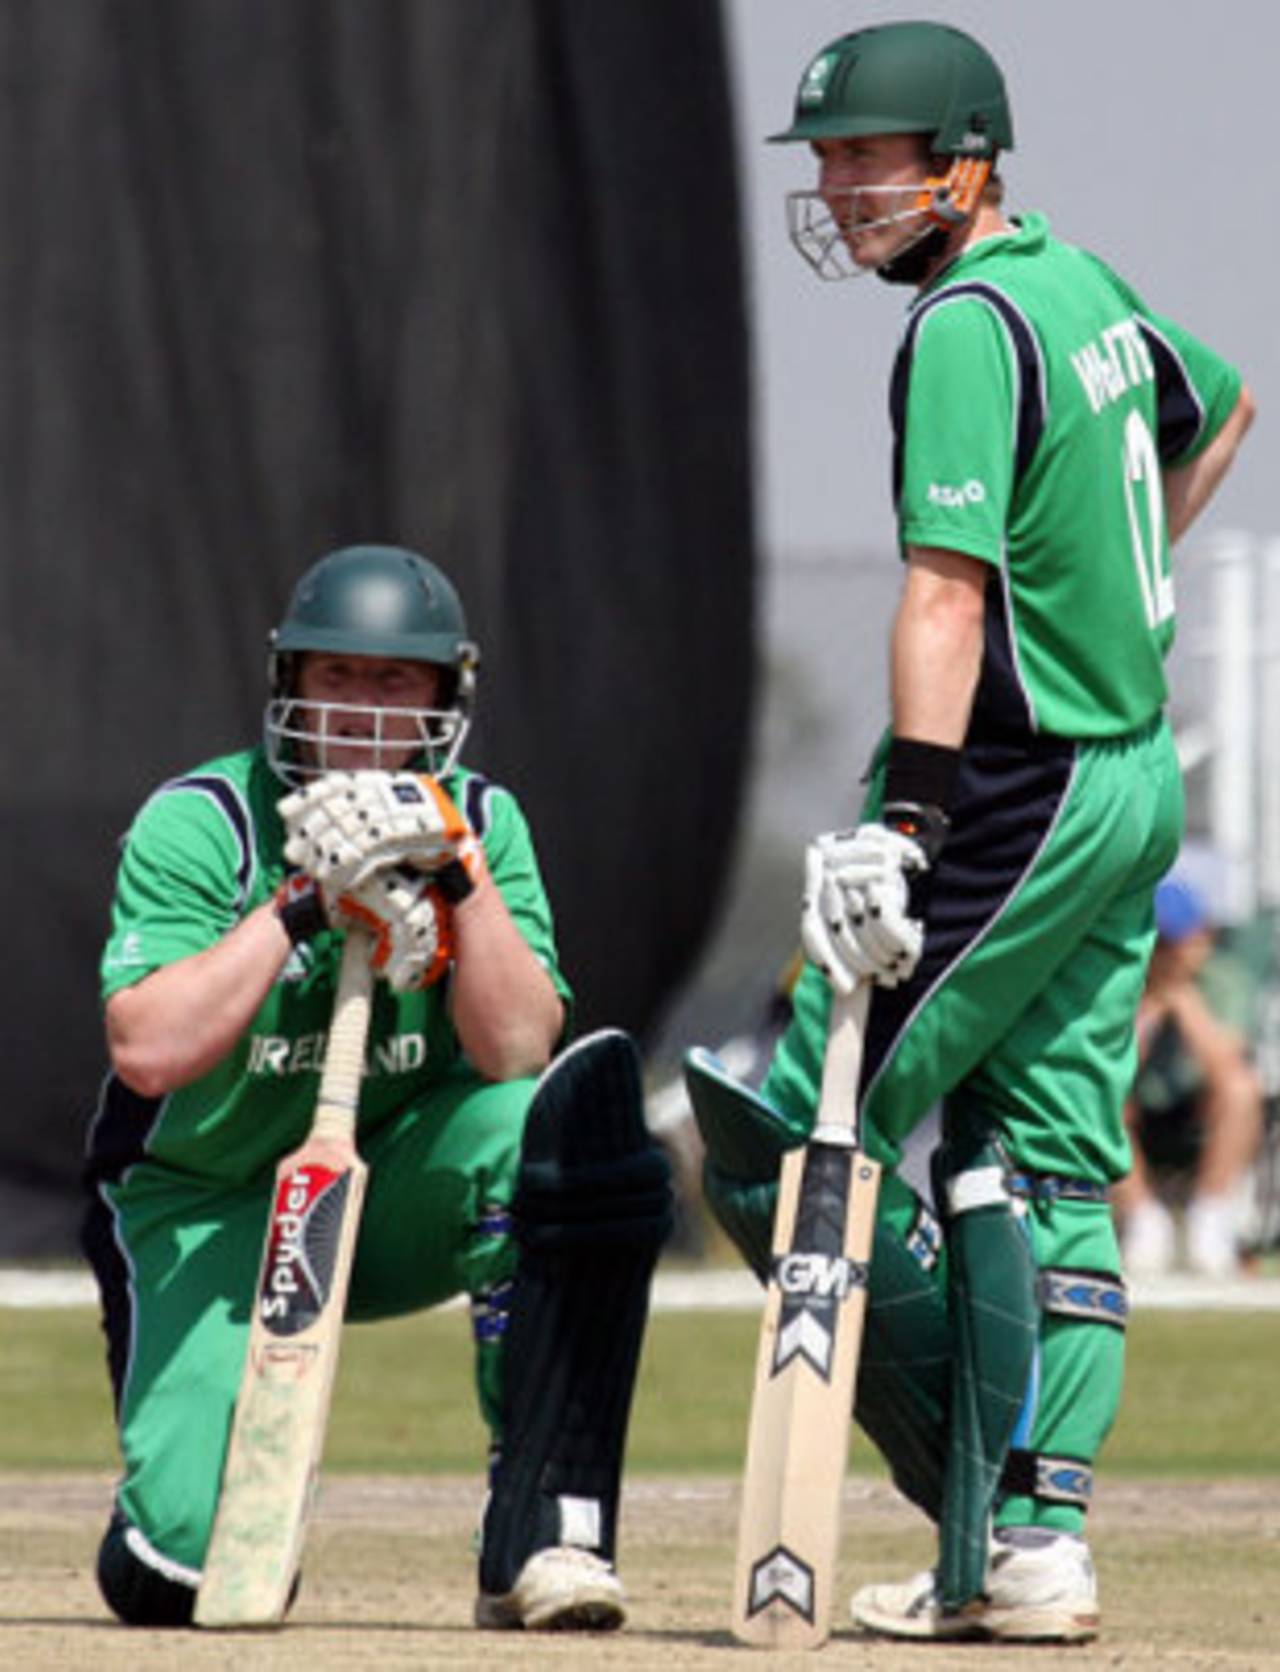 Kevin O'Brien and Andre White during their massive fifth-wicket stand, Ireland v Oman, ICC World Cup Qualifiers, Johannesburg, April 2, 2009